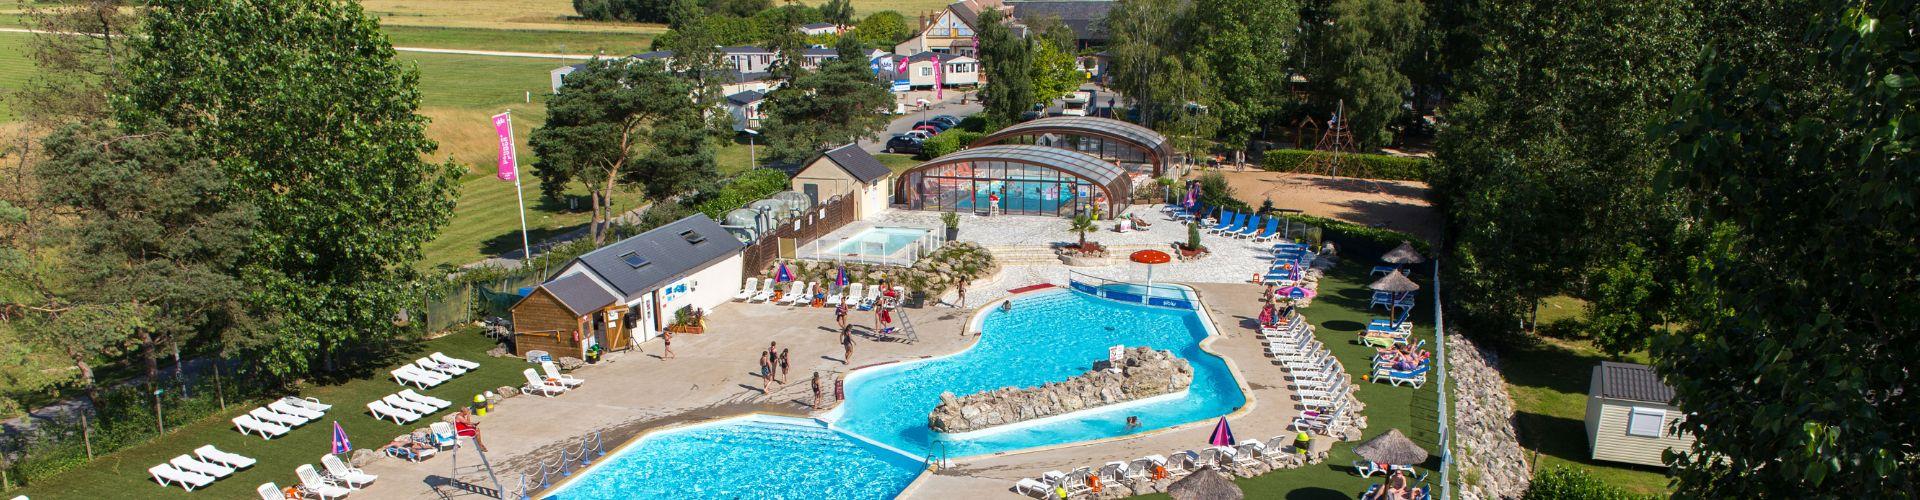 camping in france siblu holidays